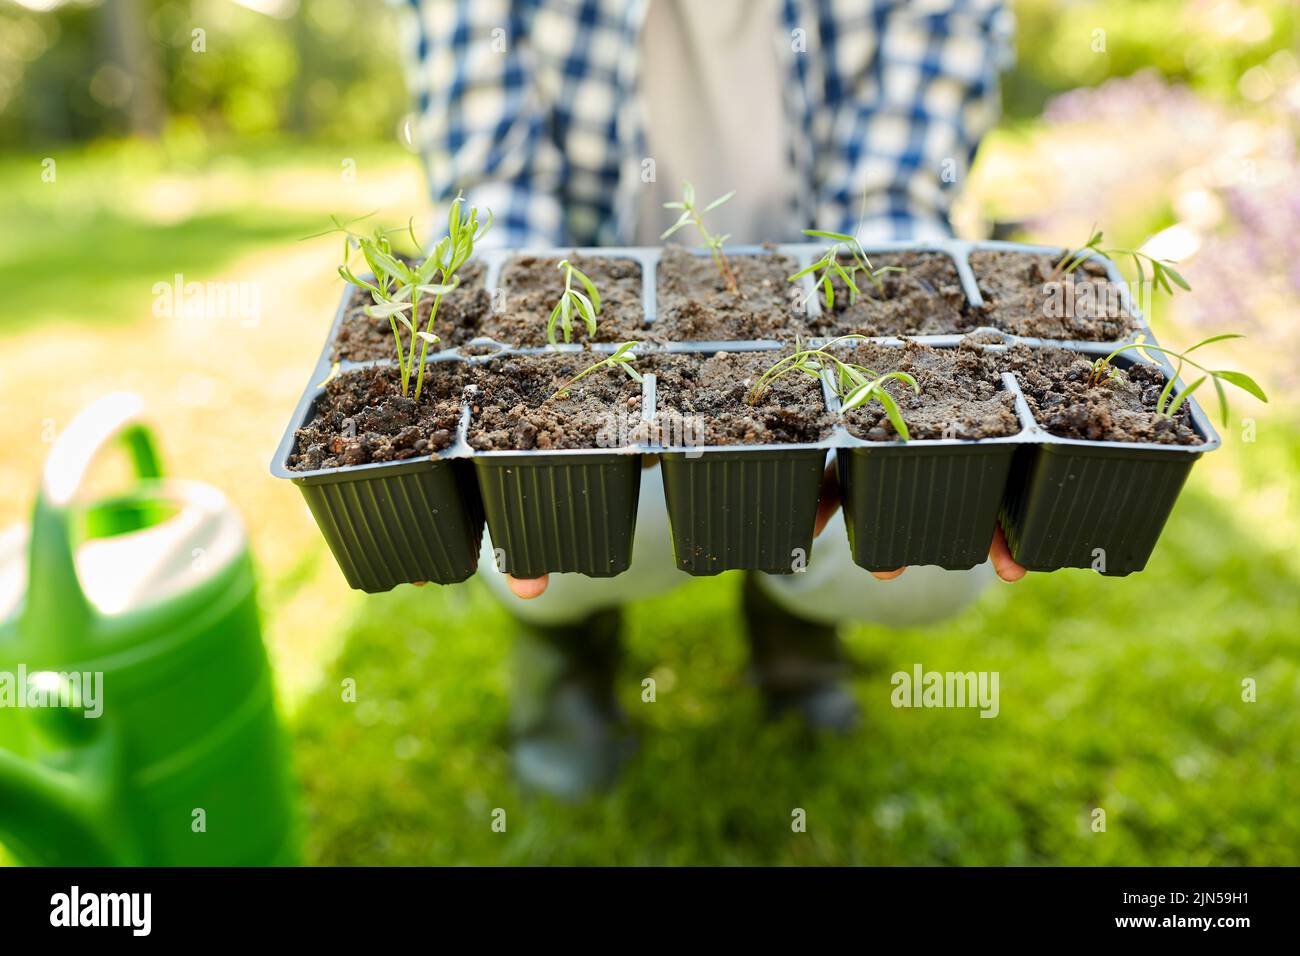 woman holding pots tray with seedlings at garden Stock Photo